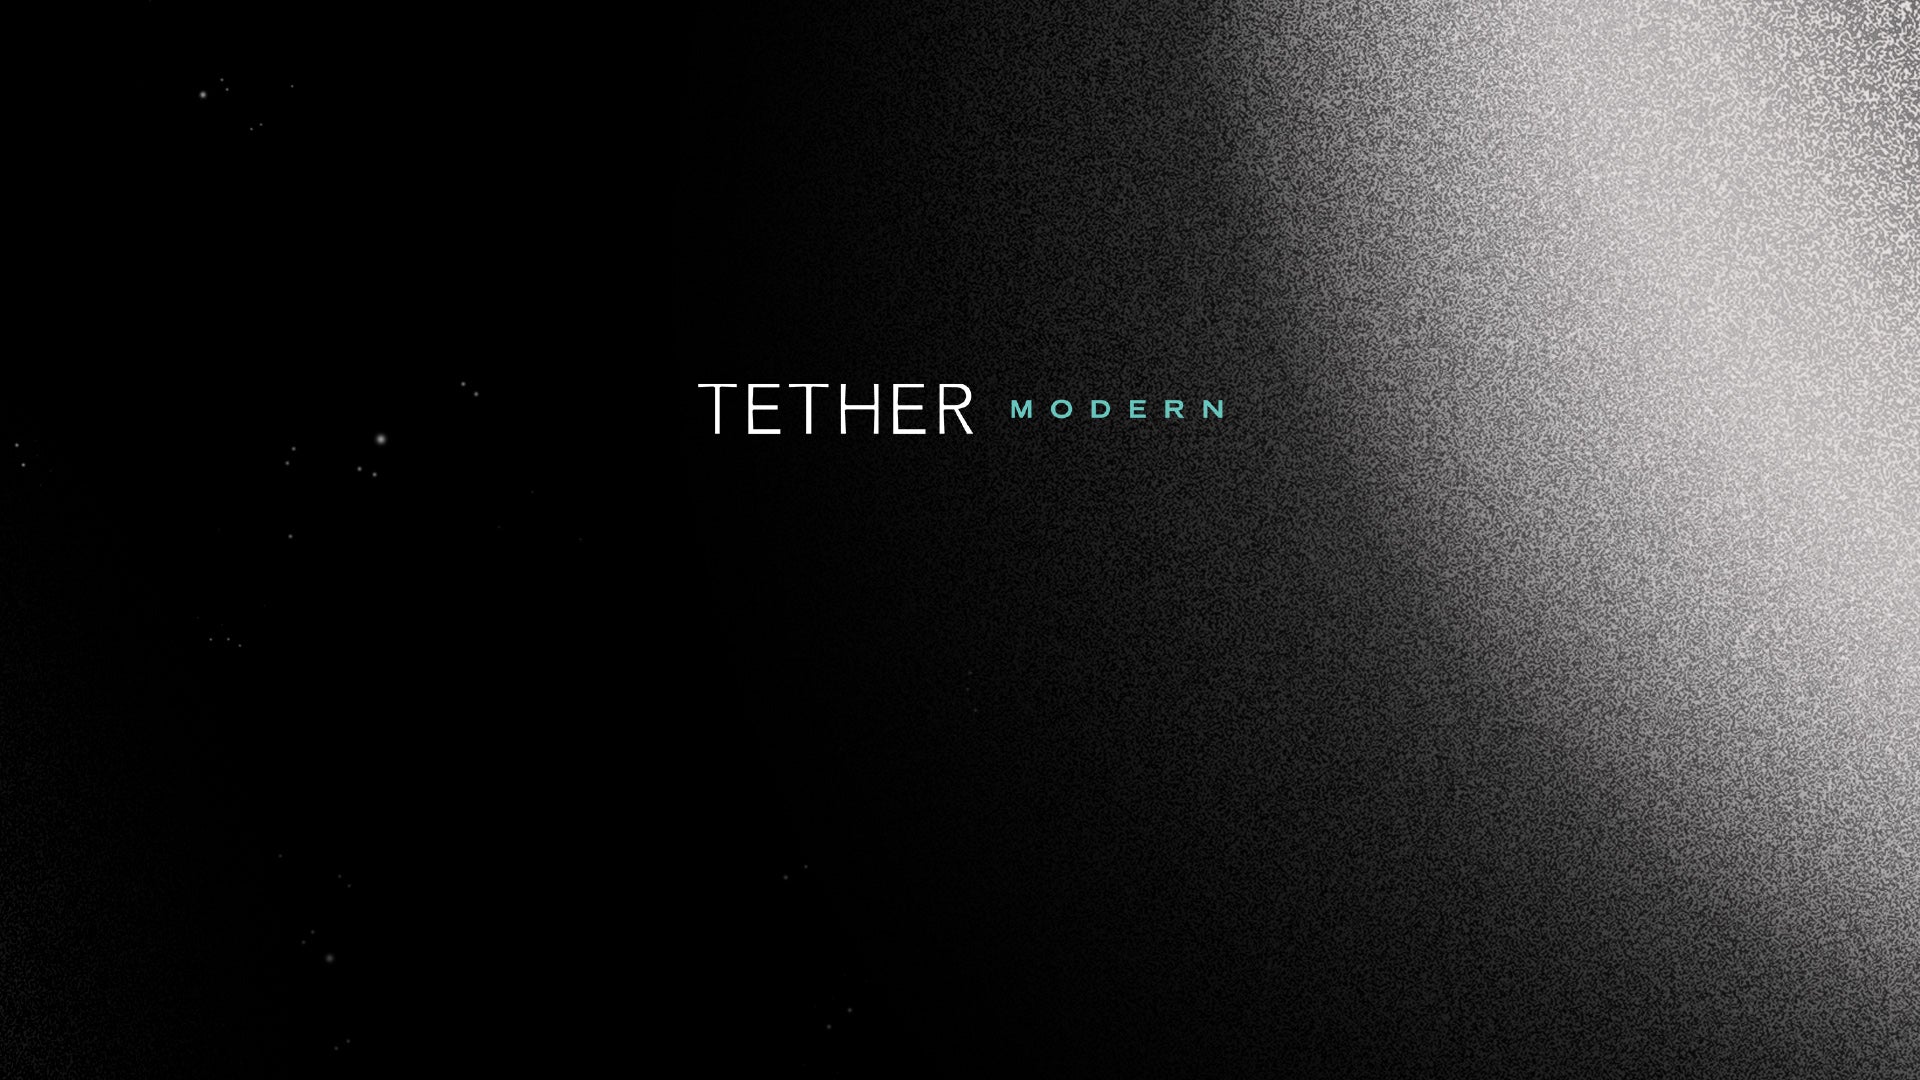 Introducing Tether Modern